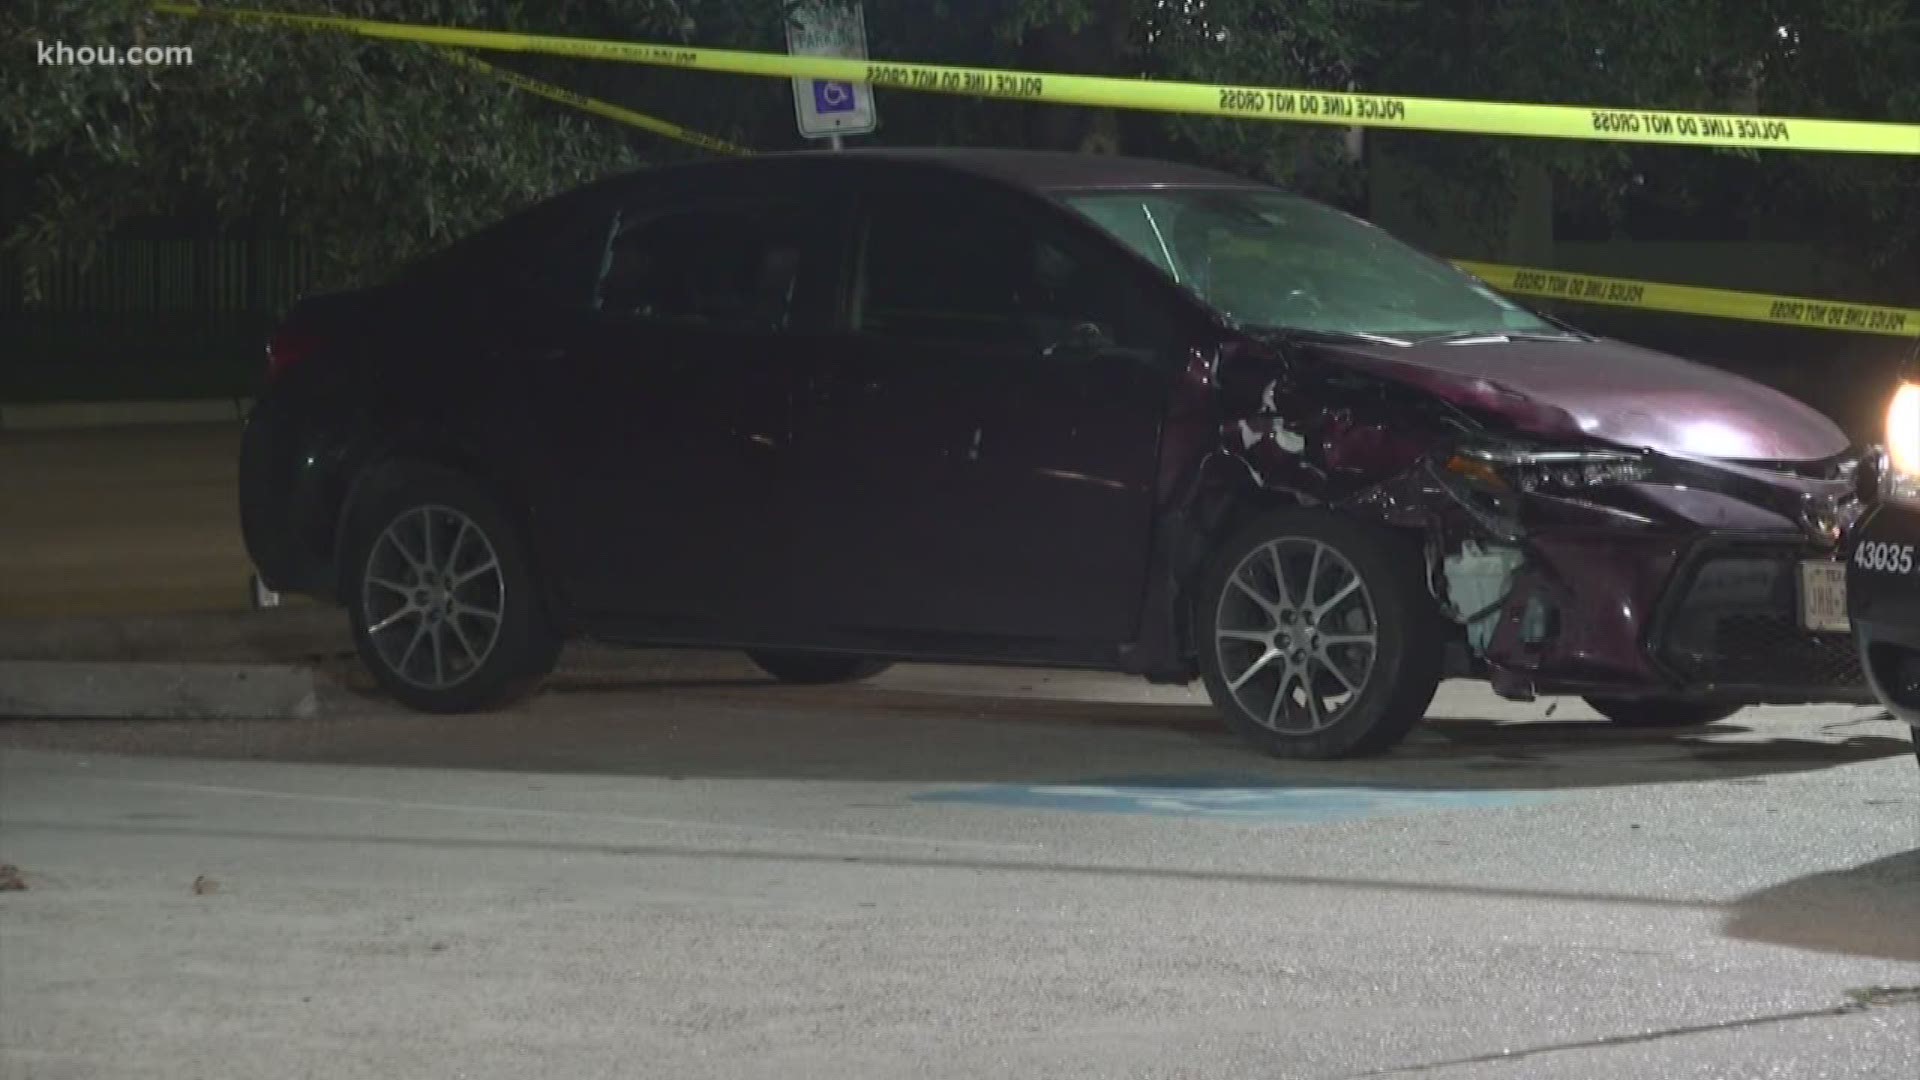 A woman who struck two people, one fatally, in a southwest Houston roadway overnight initially left the scene but later returned, police said.